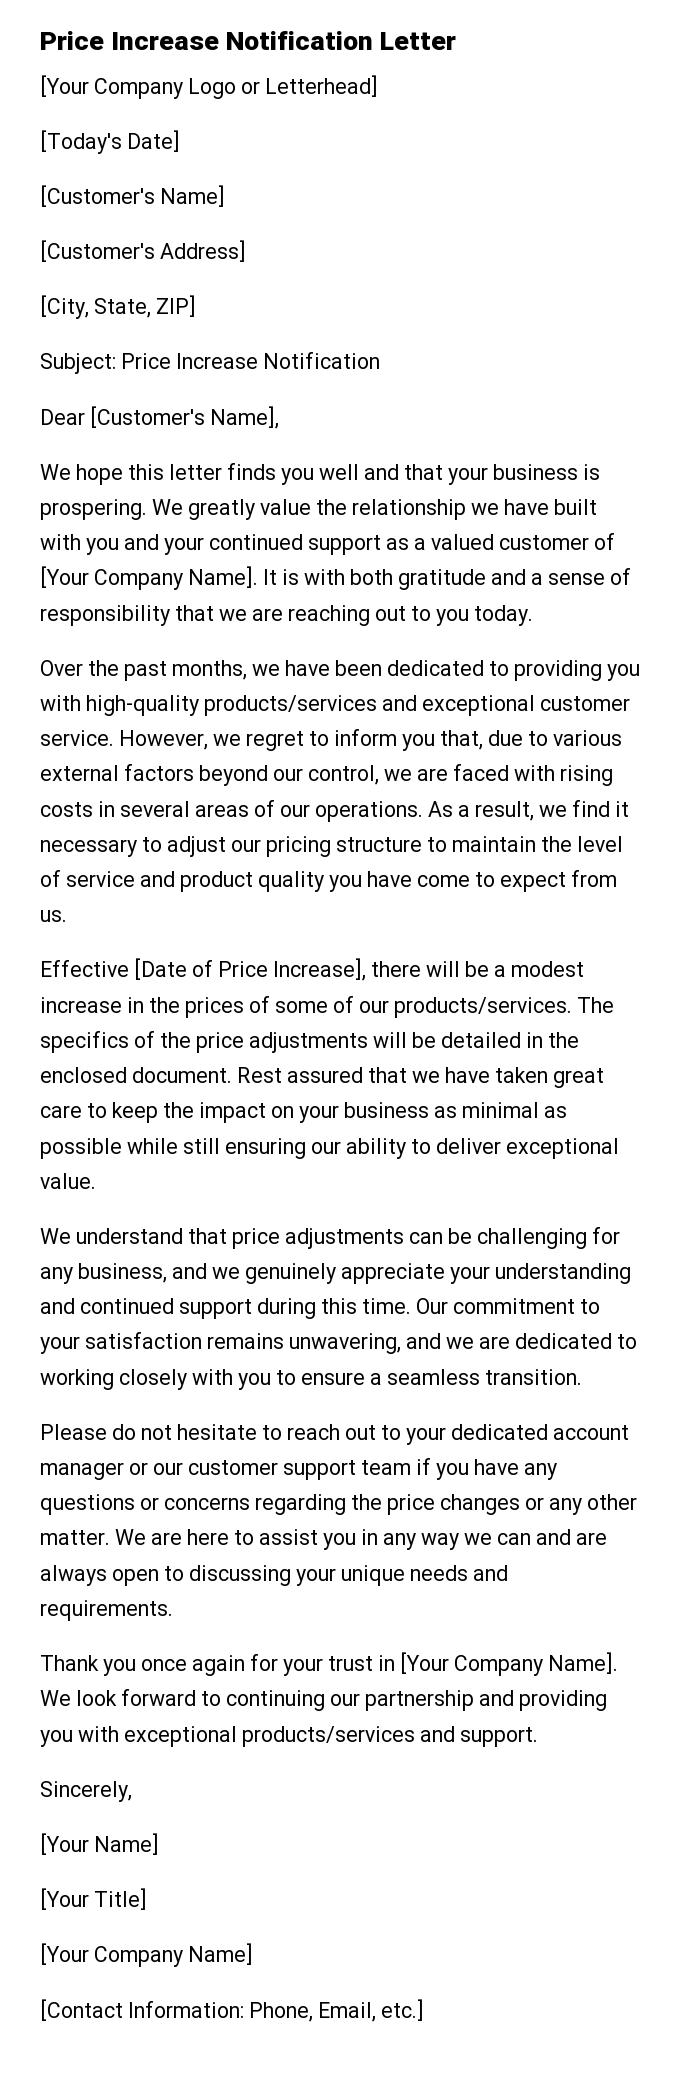 Price Increase Notification Letter